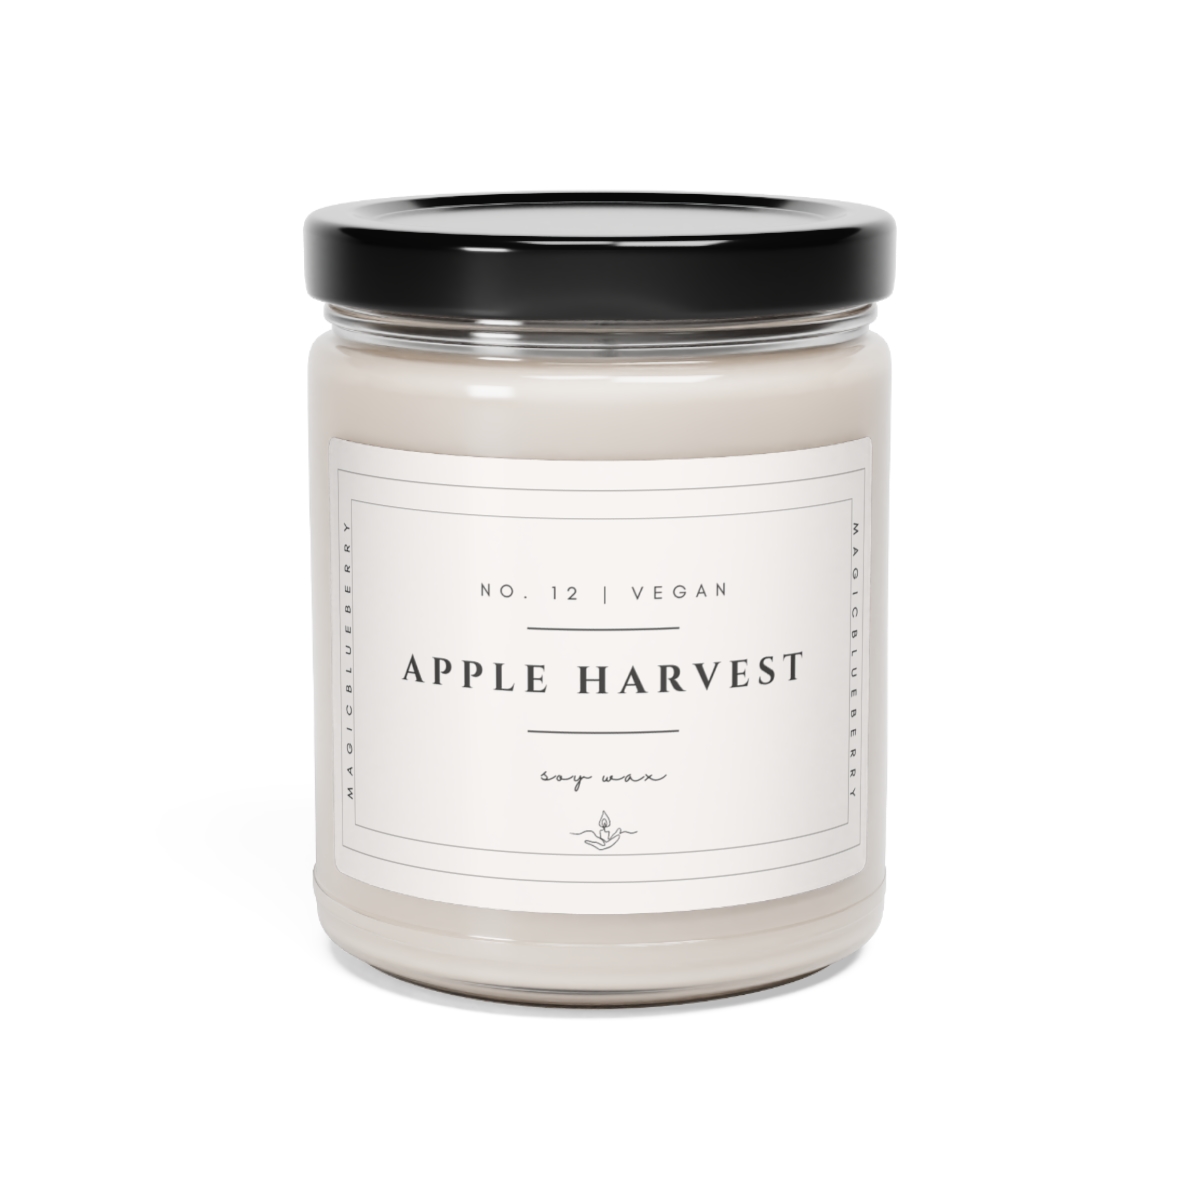 Apple Harvest Scented Vegan Soy Wax Candle Clear Jar Candle, Spell Candle, Sassy Candle Vegan Candle Cotton Wick Candle Home Deco product thumbnail image